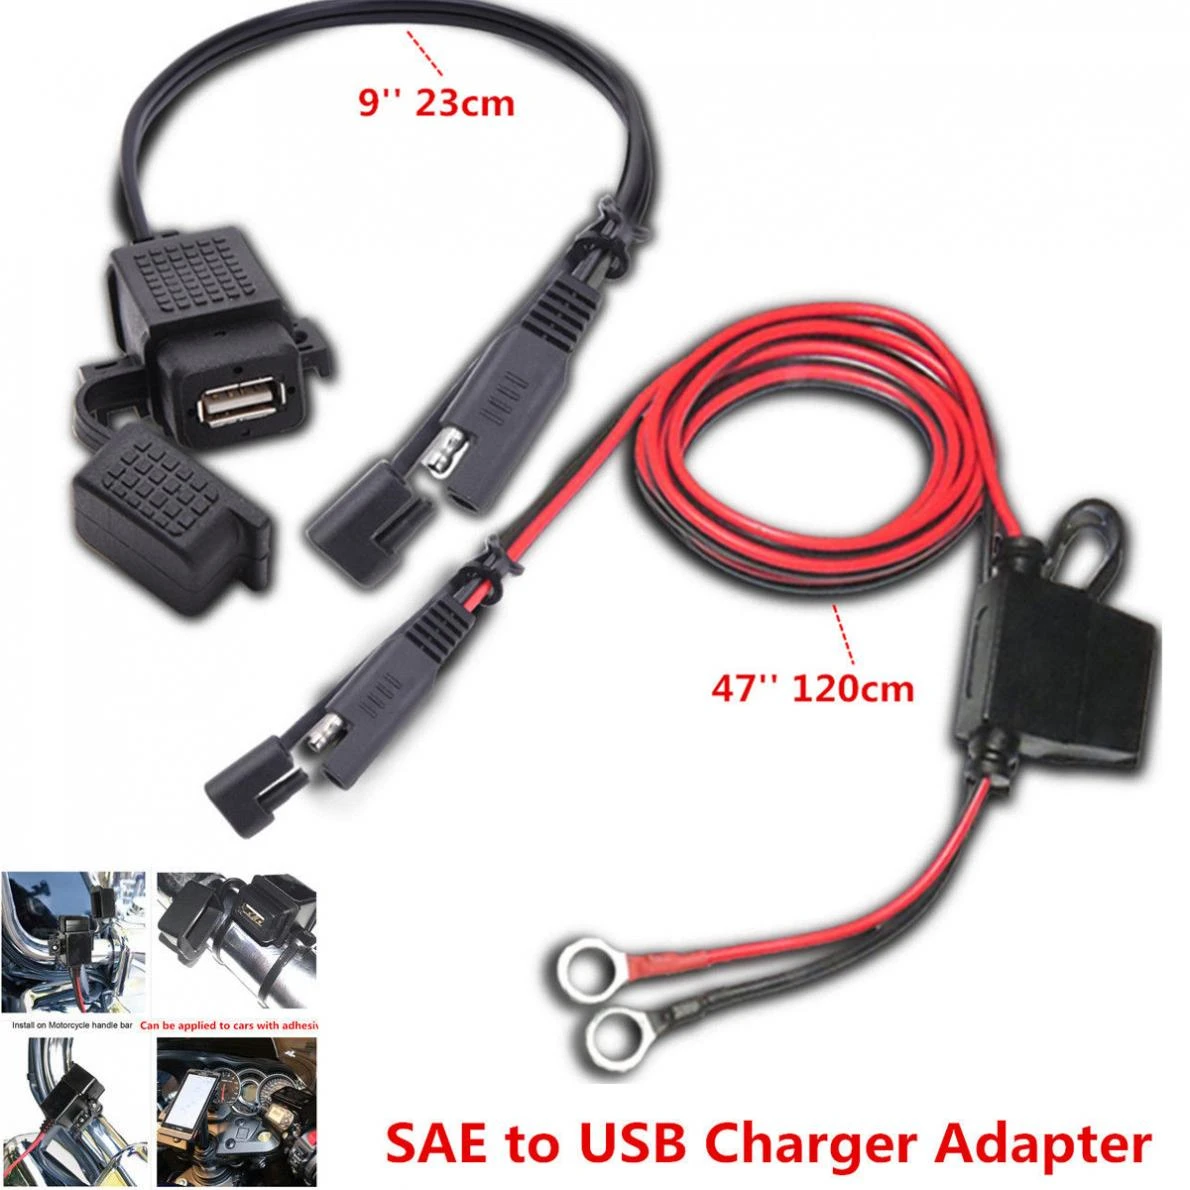 Rupse Motorcycle SAE to USB Charger Cable Adapter Kit with LED Voltmeter Waterproof Switch Control Quick Charger for Smart Phone,Camera Tablet GPS 